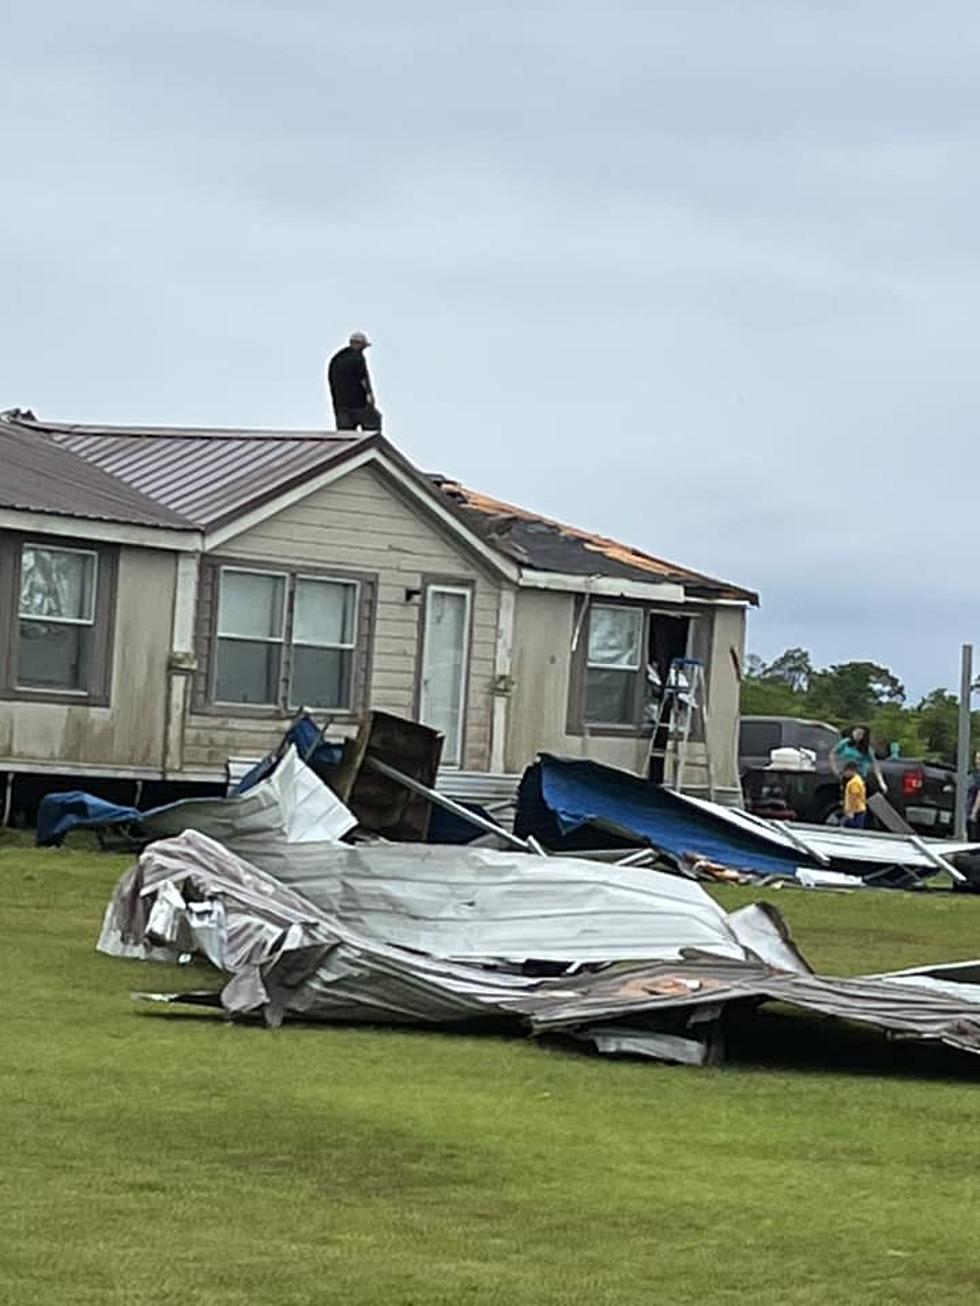 Damages Reported Across Acadiana After Early Morning Storms Rumble Through [Pics/Video]